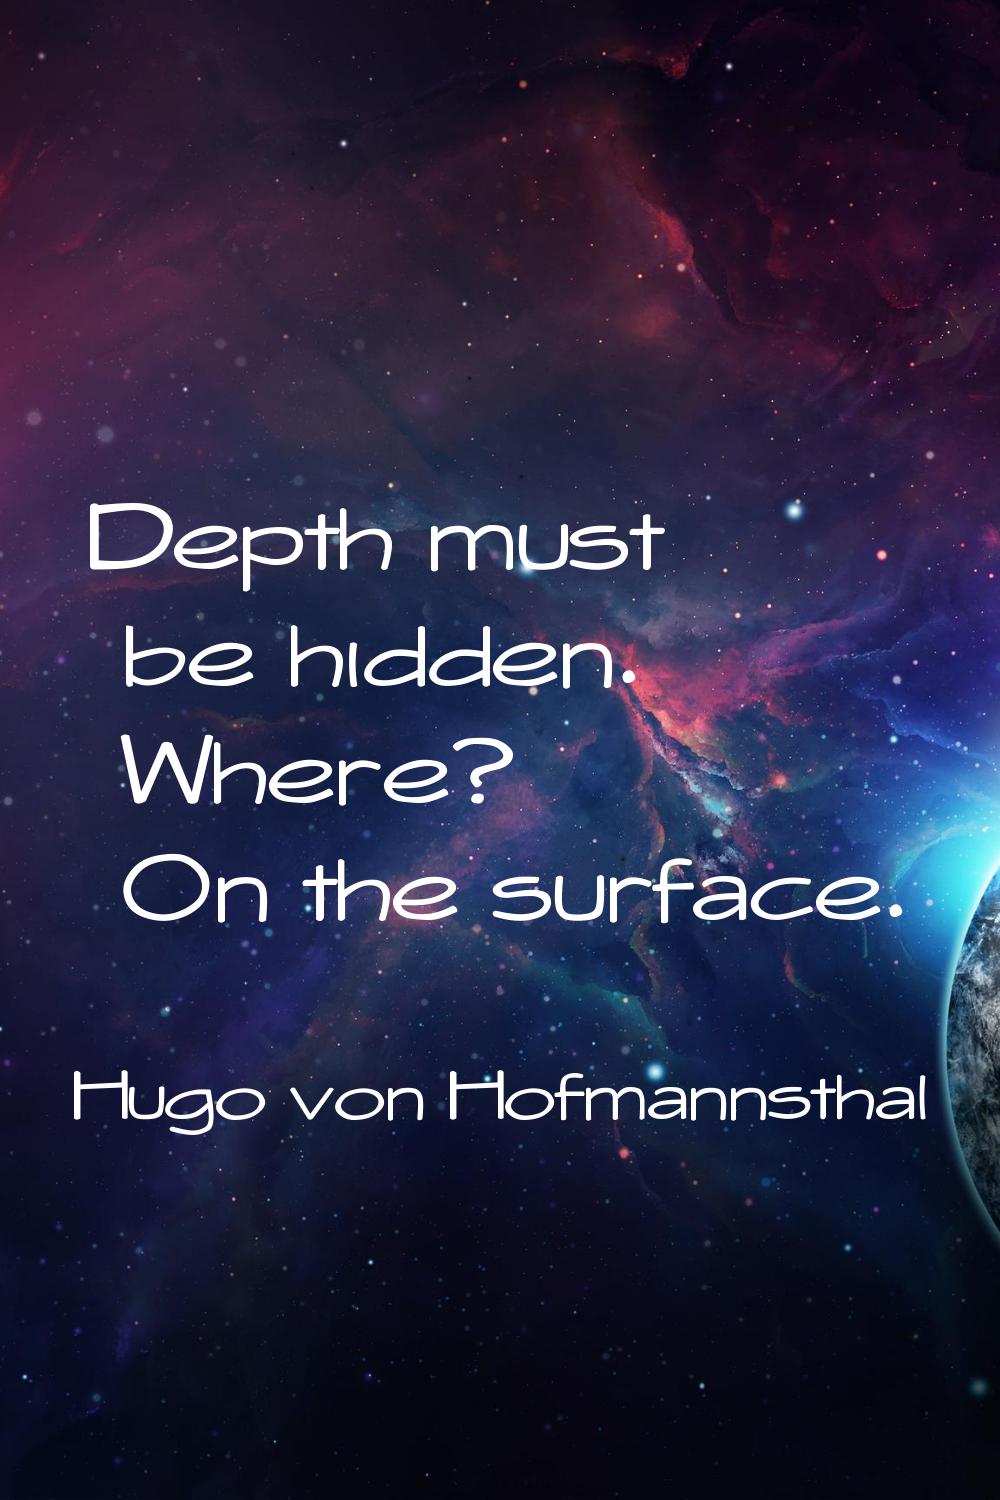 Depth must be hidden. Where? On the surface.